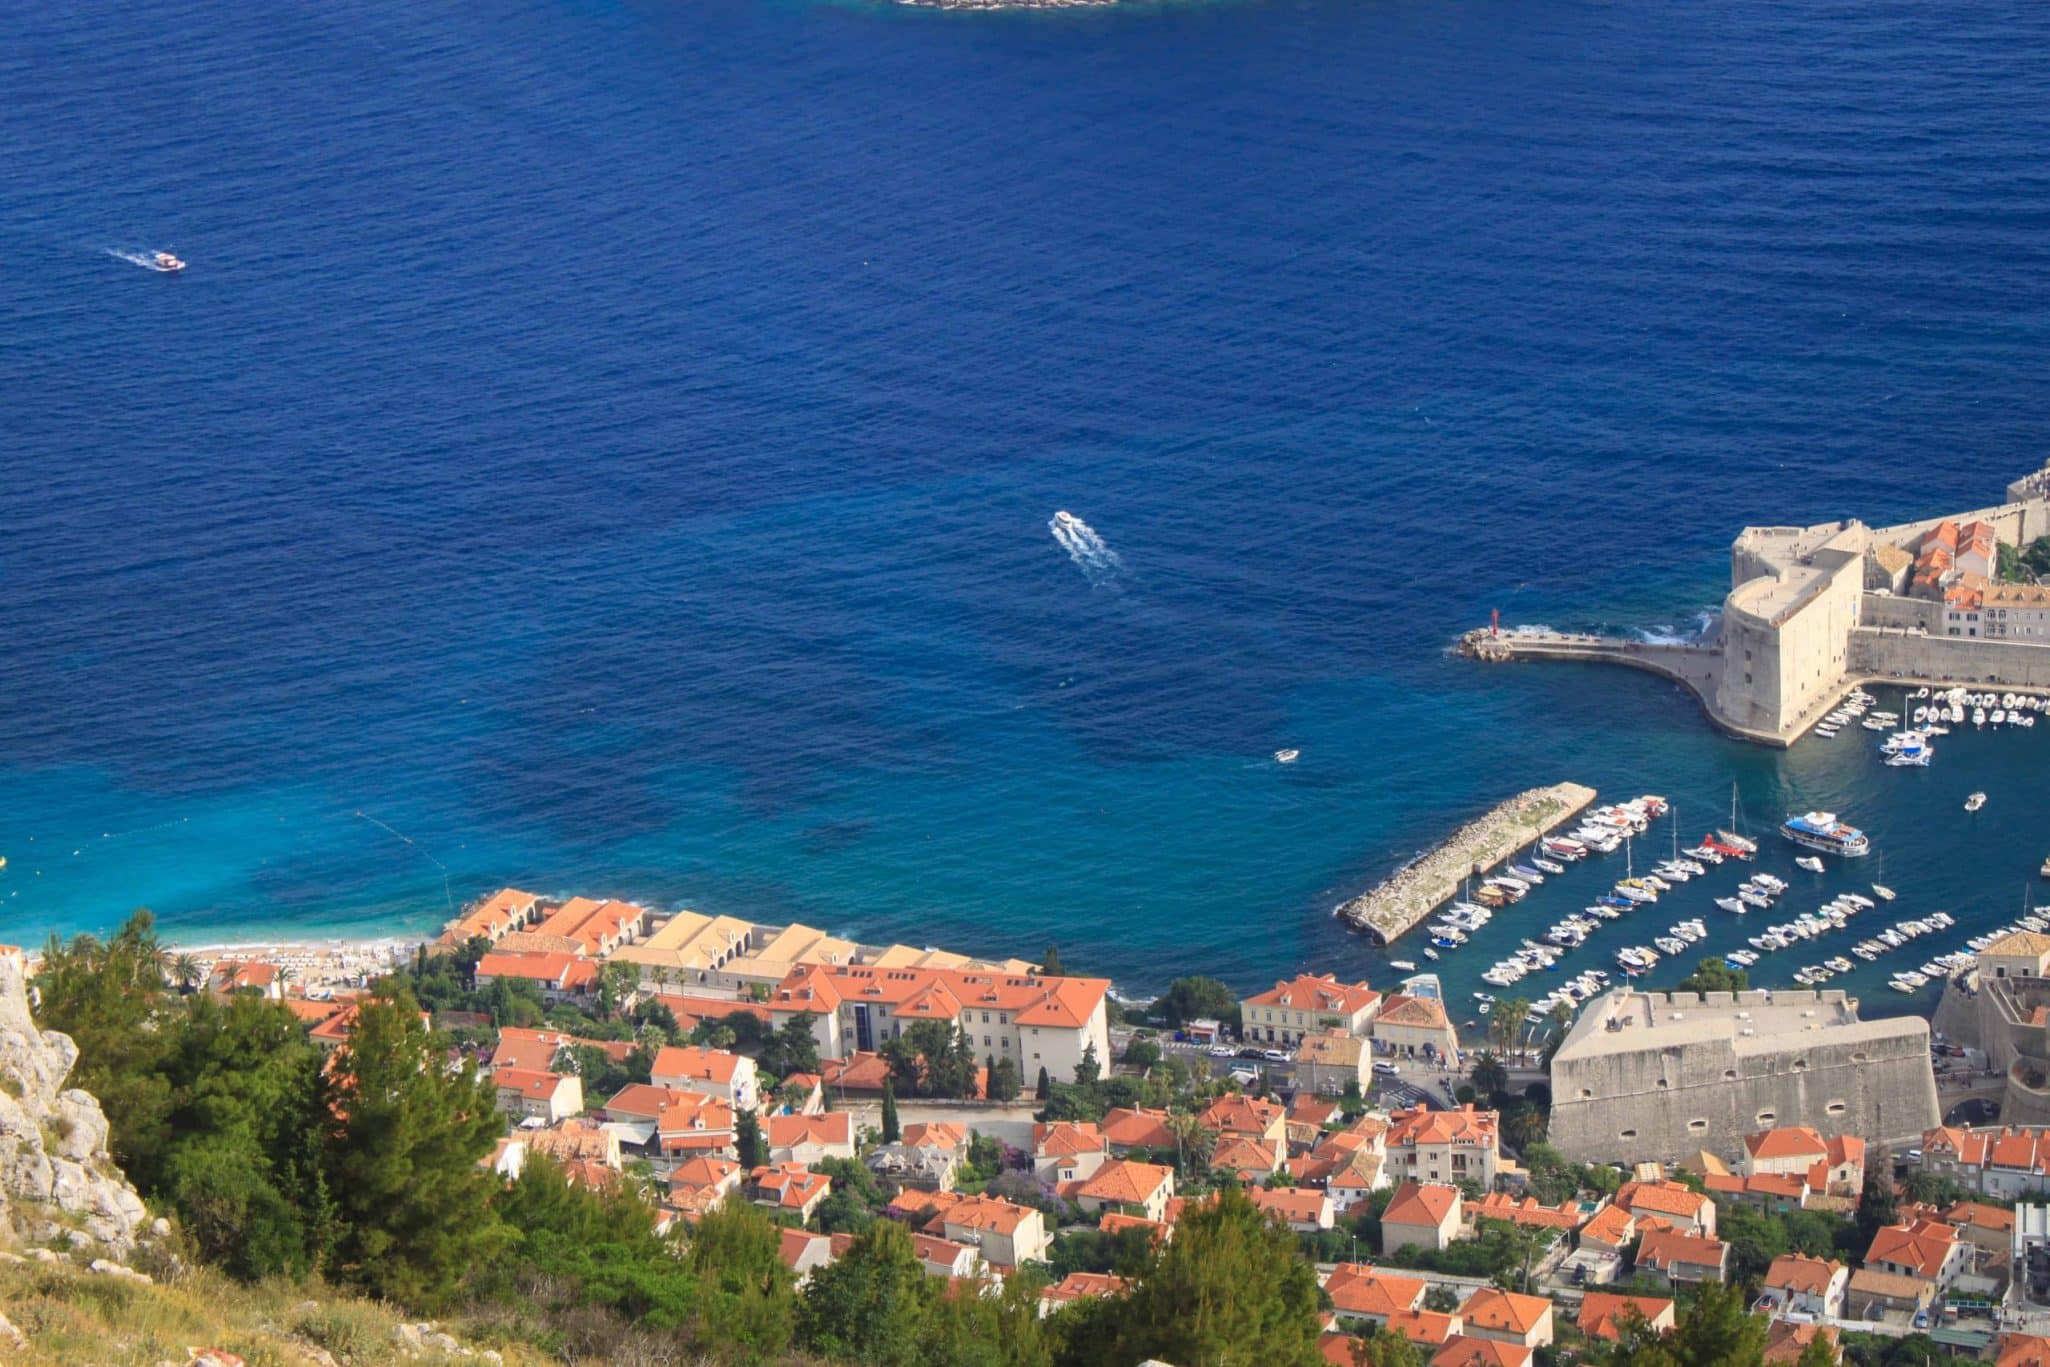 20 fun facts about Croatia you didn’t know